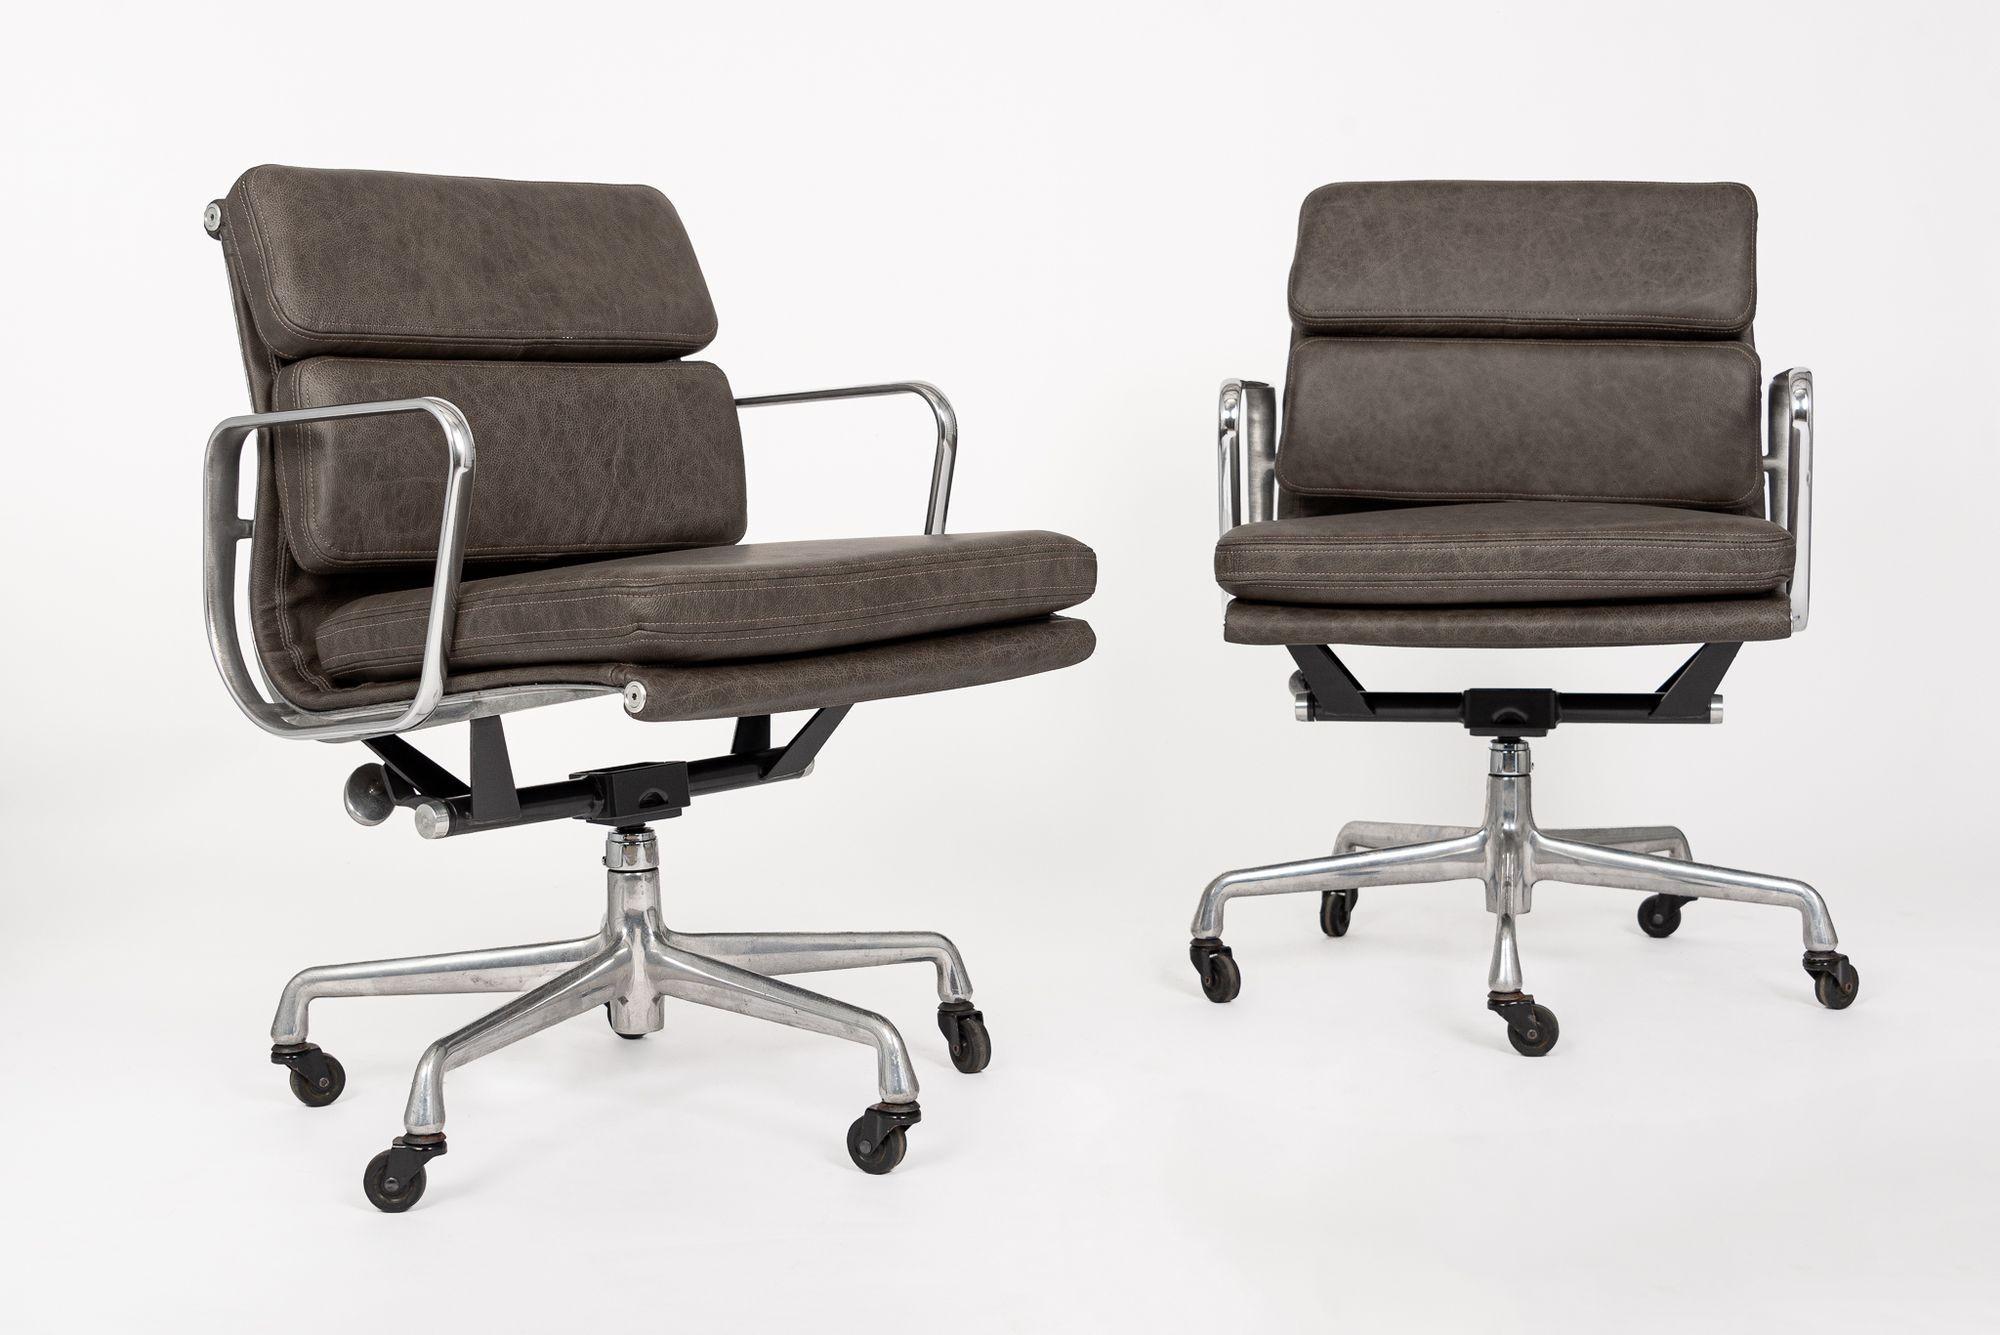 These original Eames for Herman Miller Soft Pad Management Height textured gray leather desk chairs from the Aluminum Group Collection were manufactured in the 2000s. This classic mid century modern office chair was first introduced in 1969 by